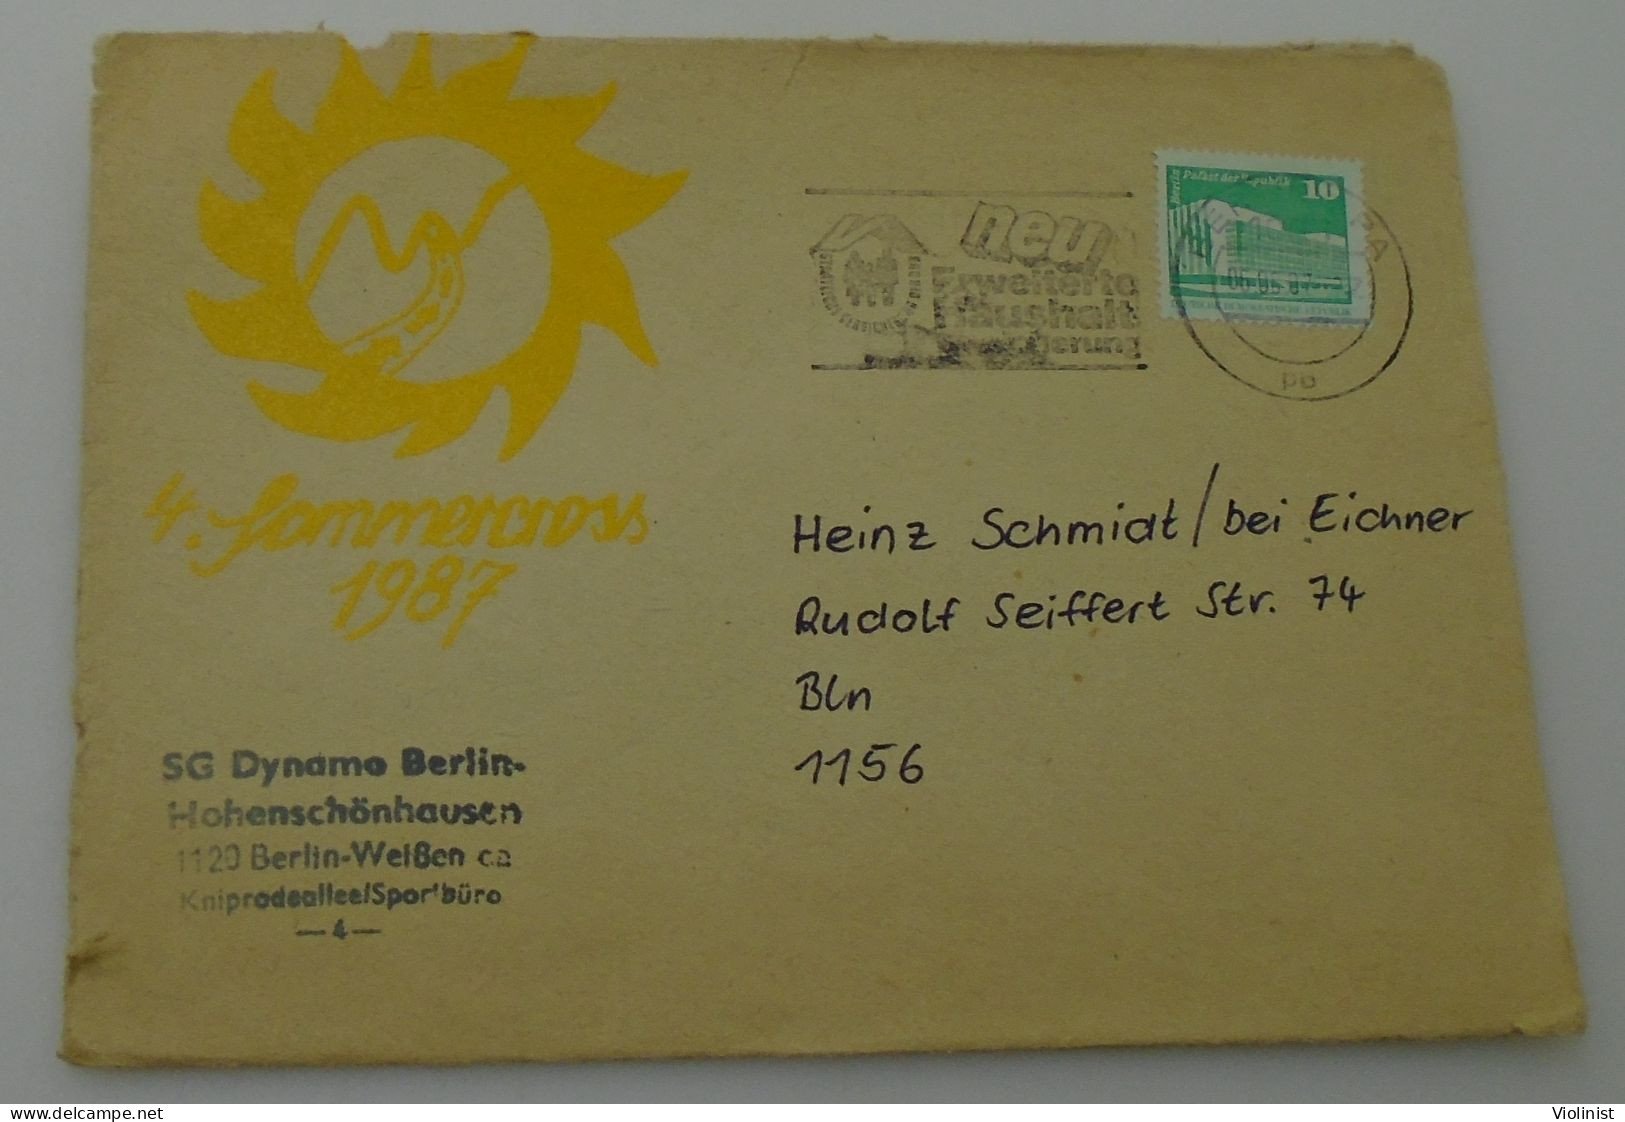 Germany-SG Dynamo Berlin-4.Sommercross 1987. - Private Covers - Used